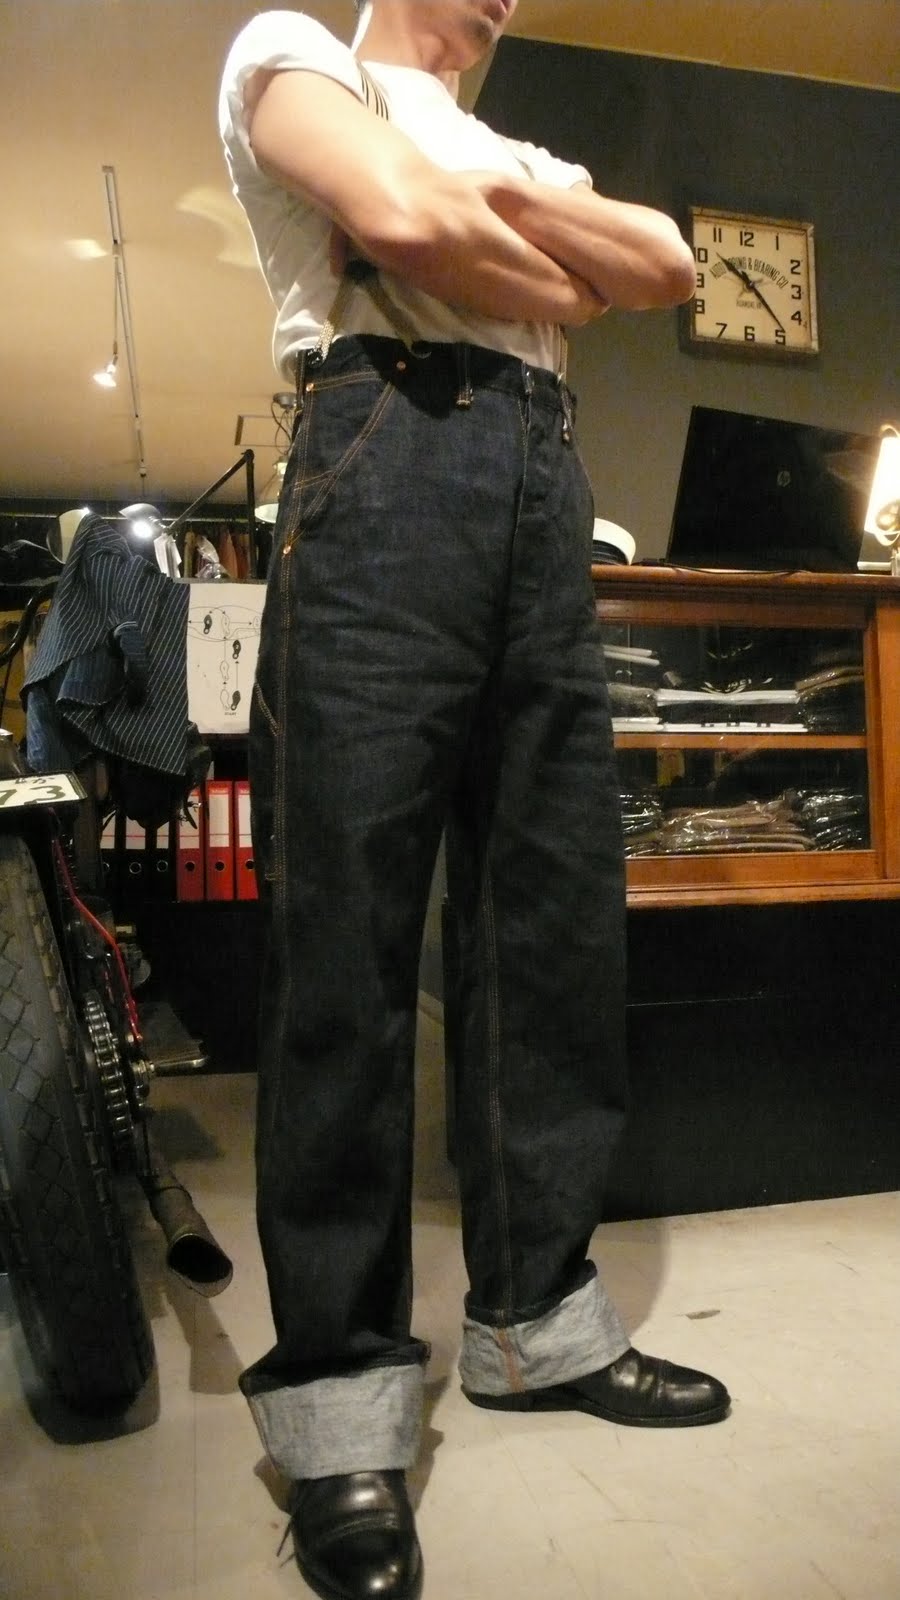 WARP AND WOOF: Copper Riveted Overalls の試着画像です。